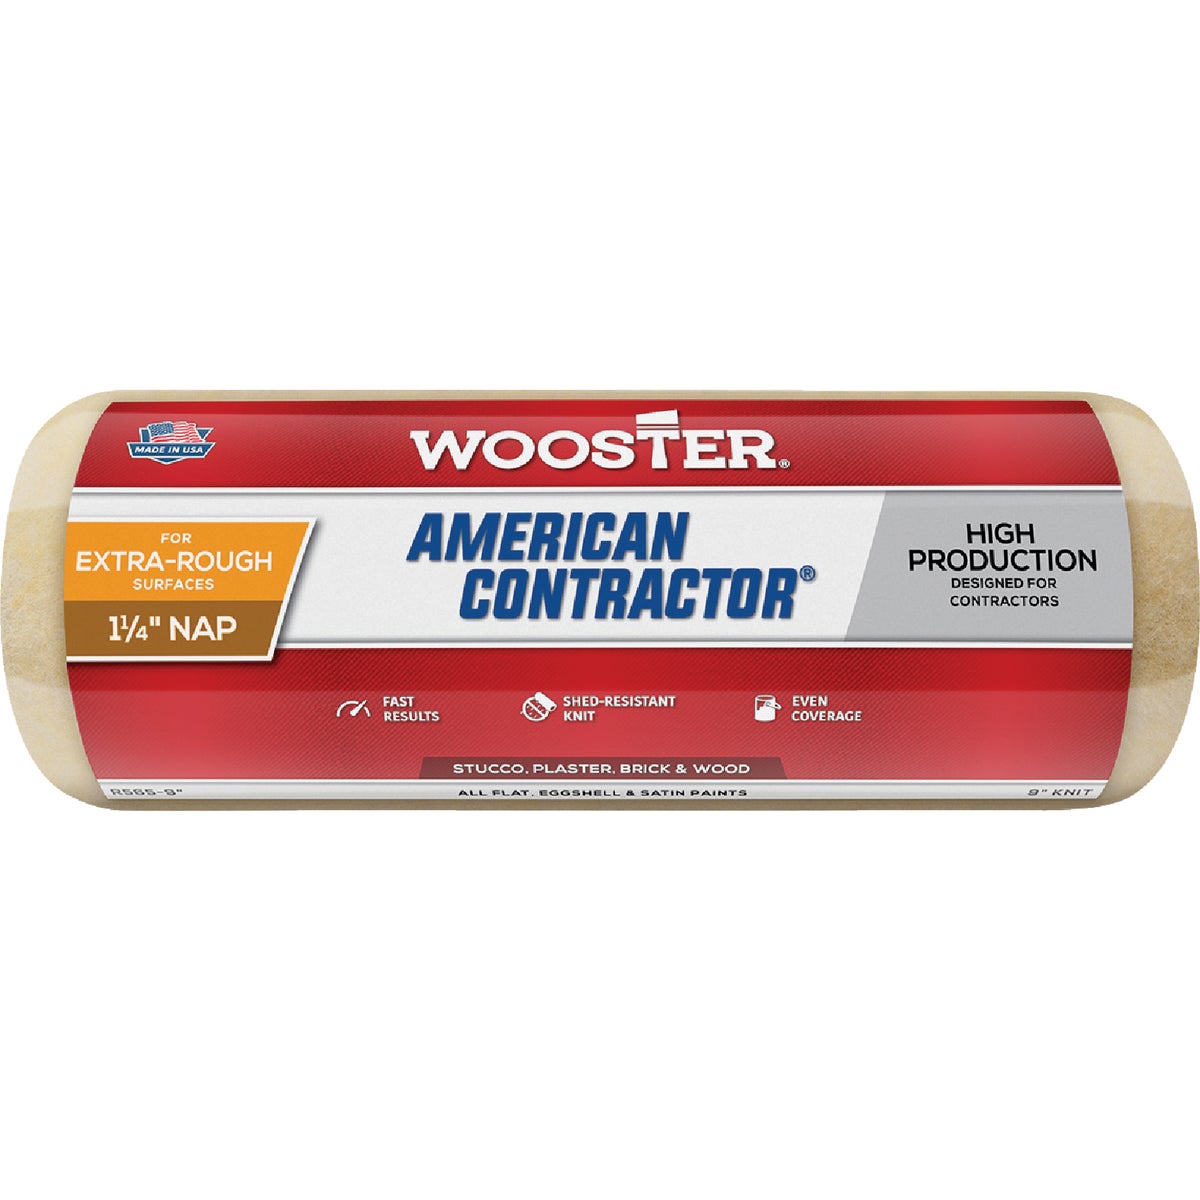 Wooster American Contractor 9 In. x 1-1/4 In. Knit Fabric Roller Cover